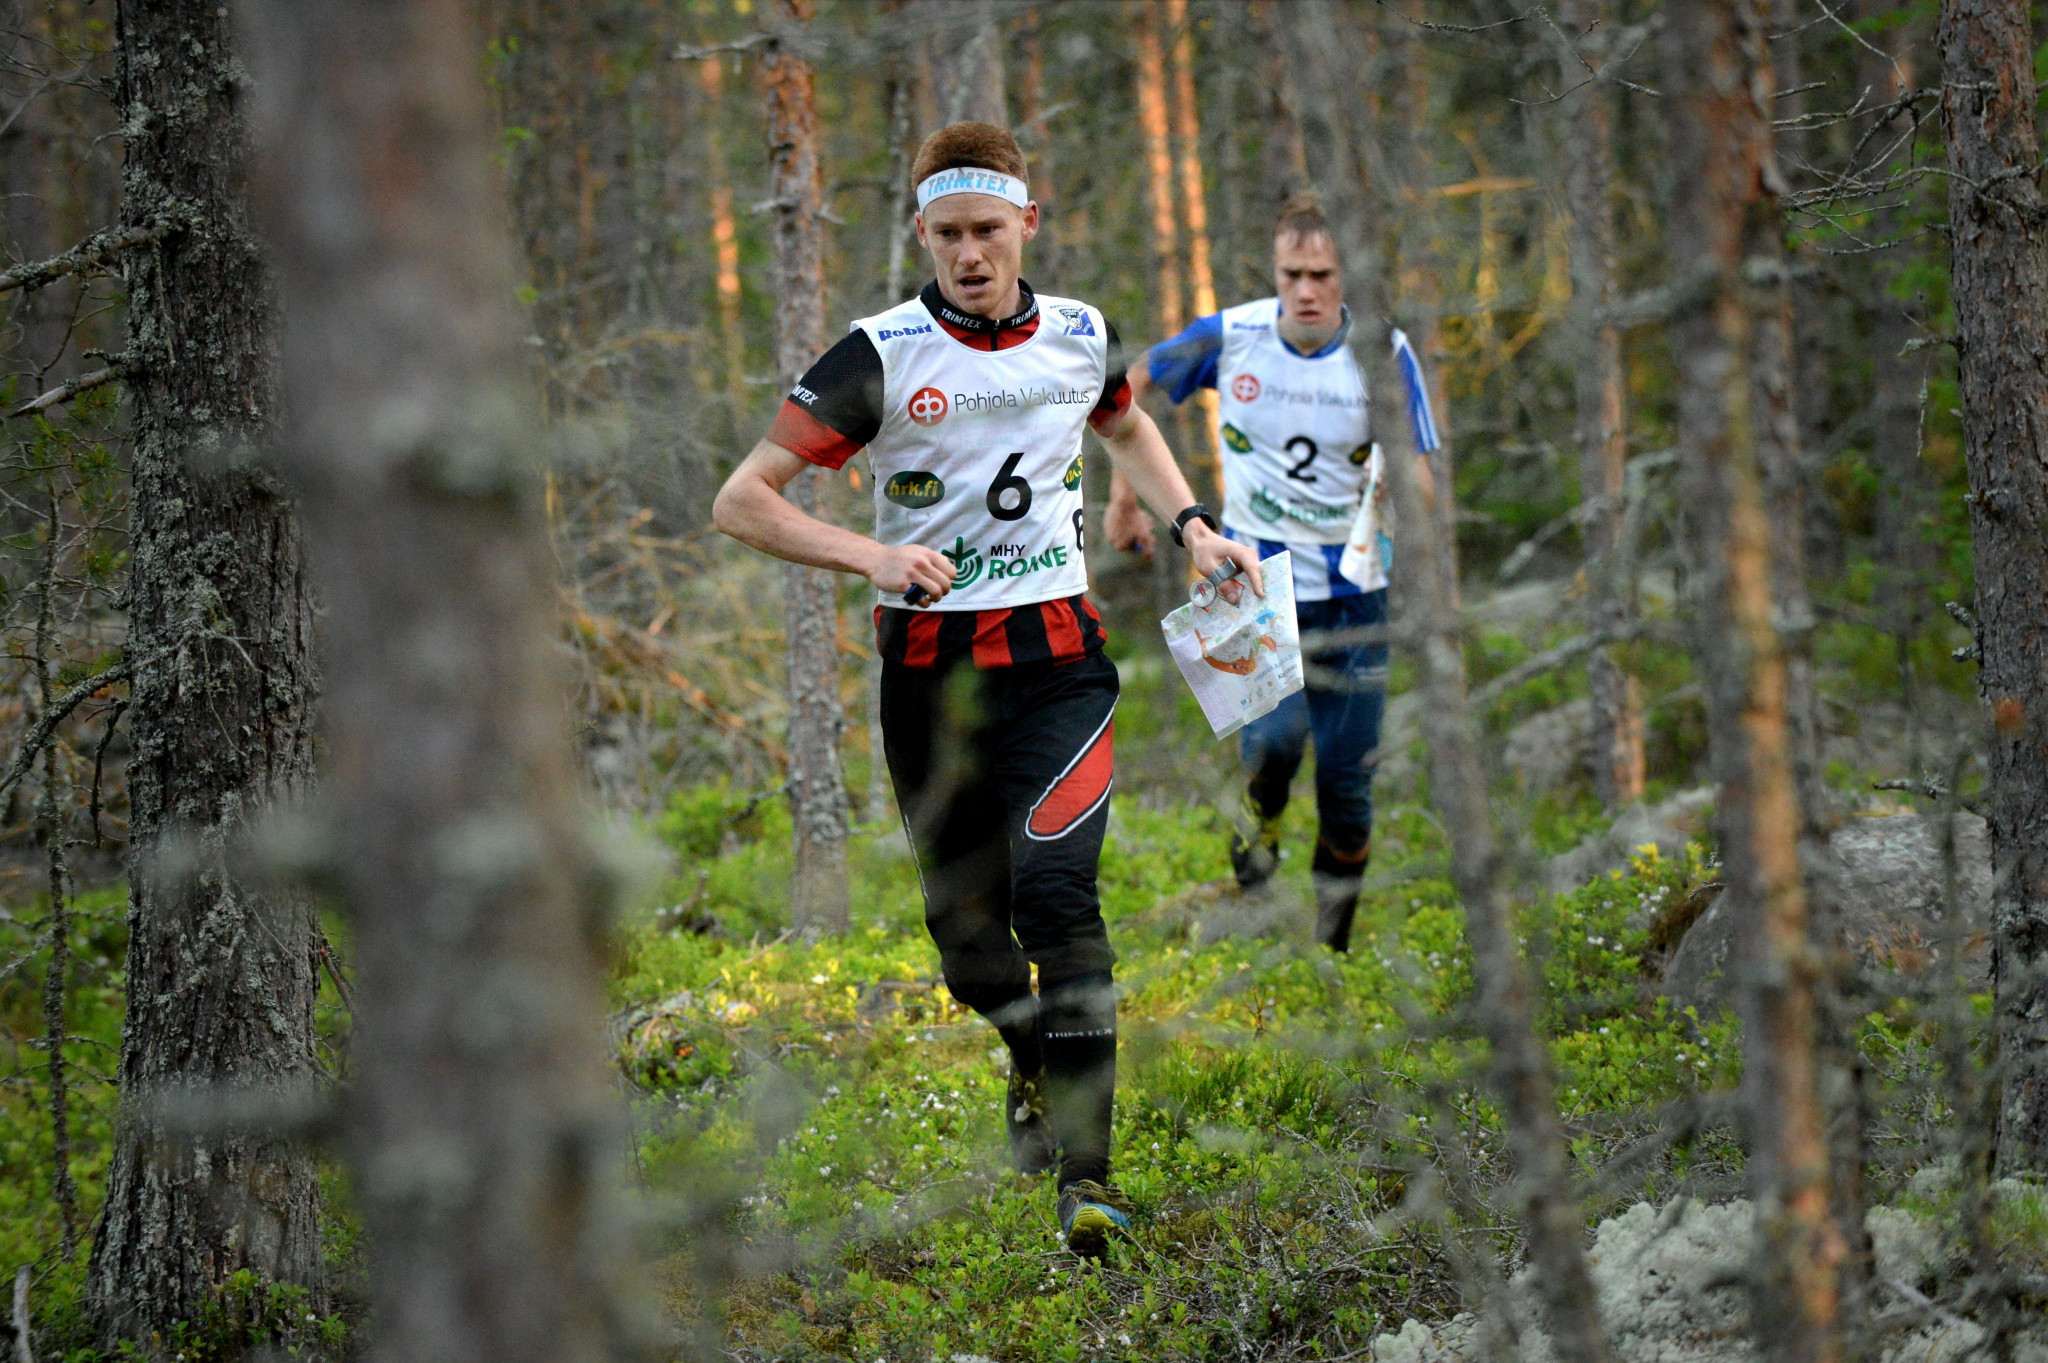 World Orienteering Day aims to boost the sport's visibility, particularly in schools ©Getty Images